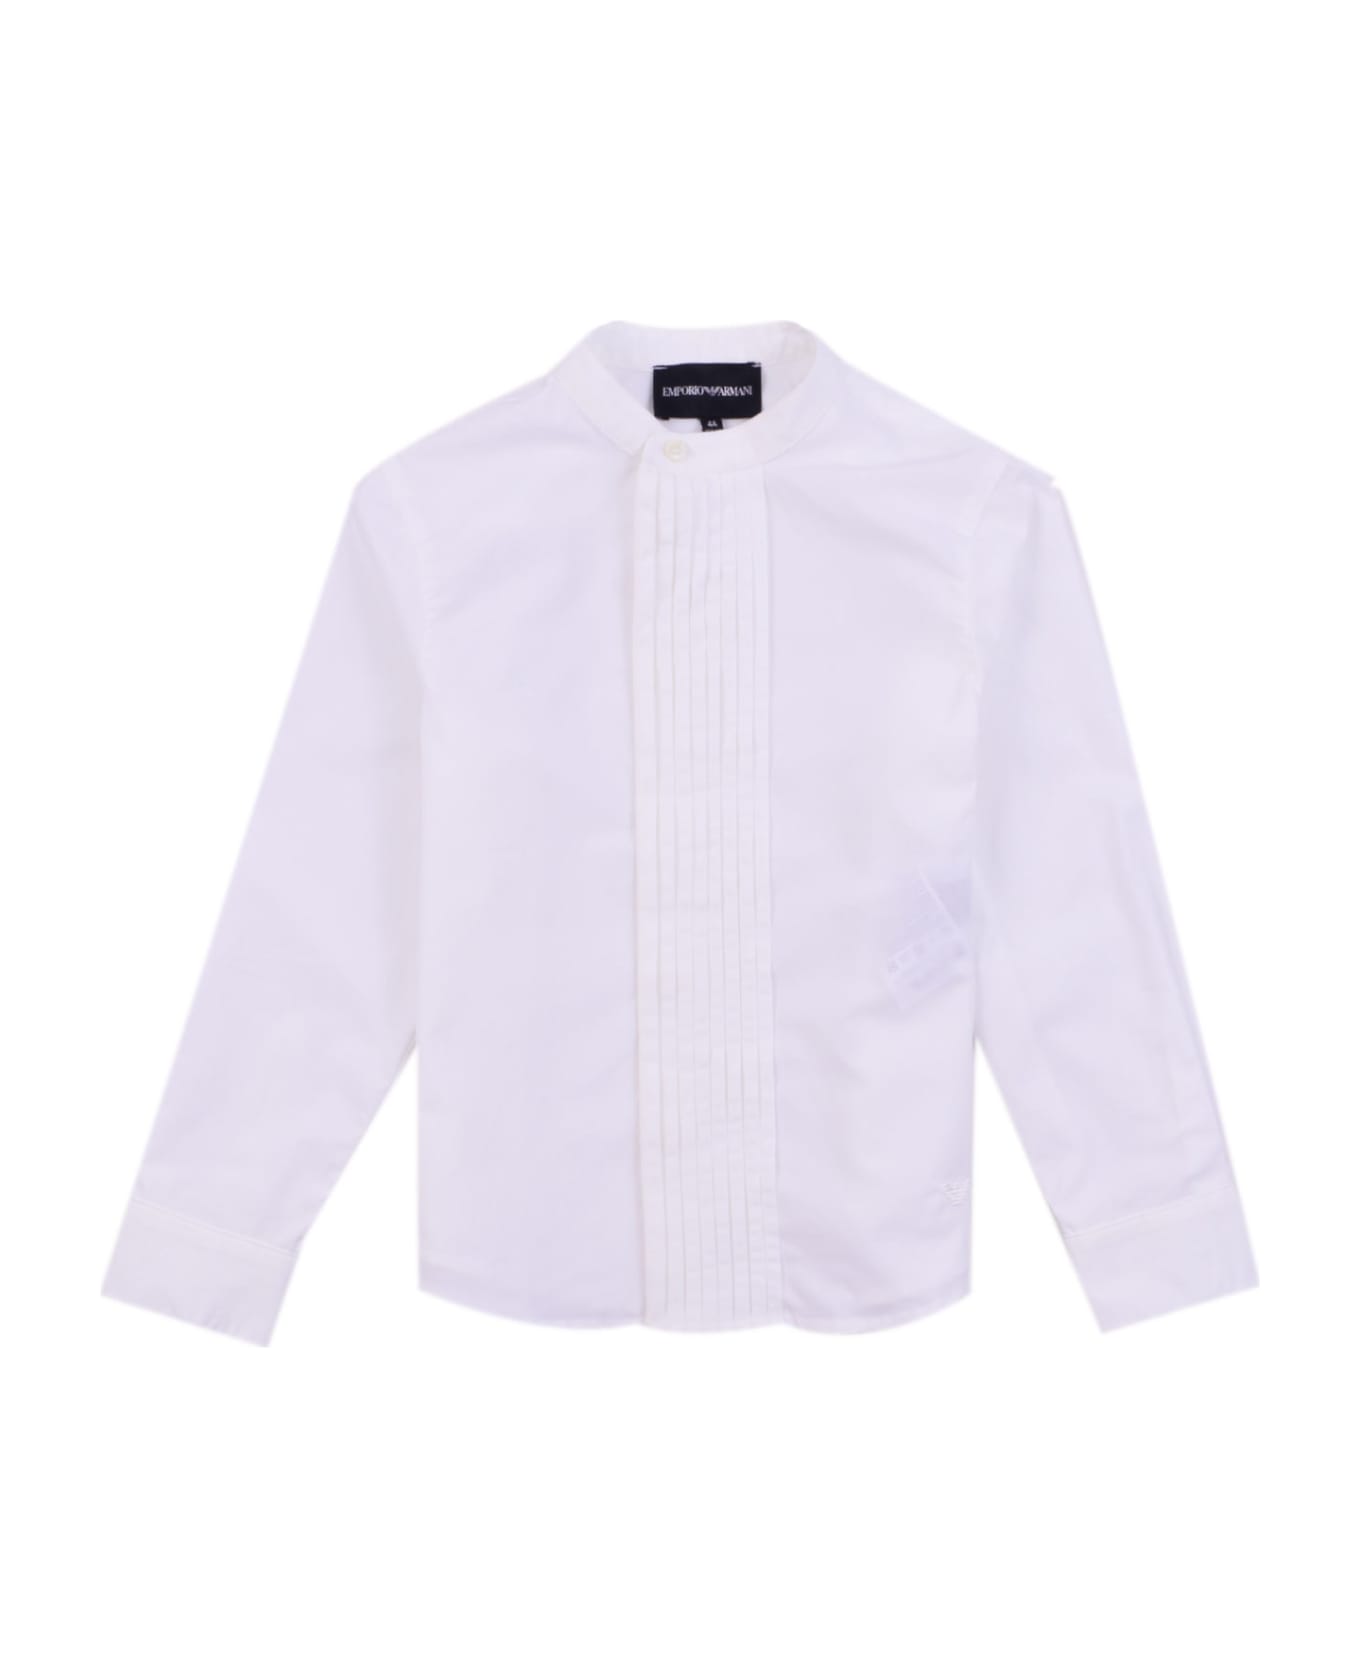 Emporio Armani Shirt With Pleated Detail - White シャツ